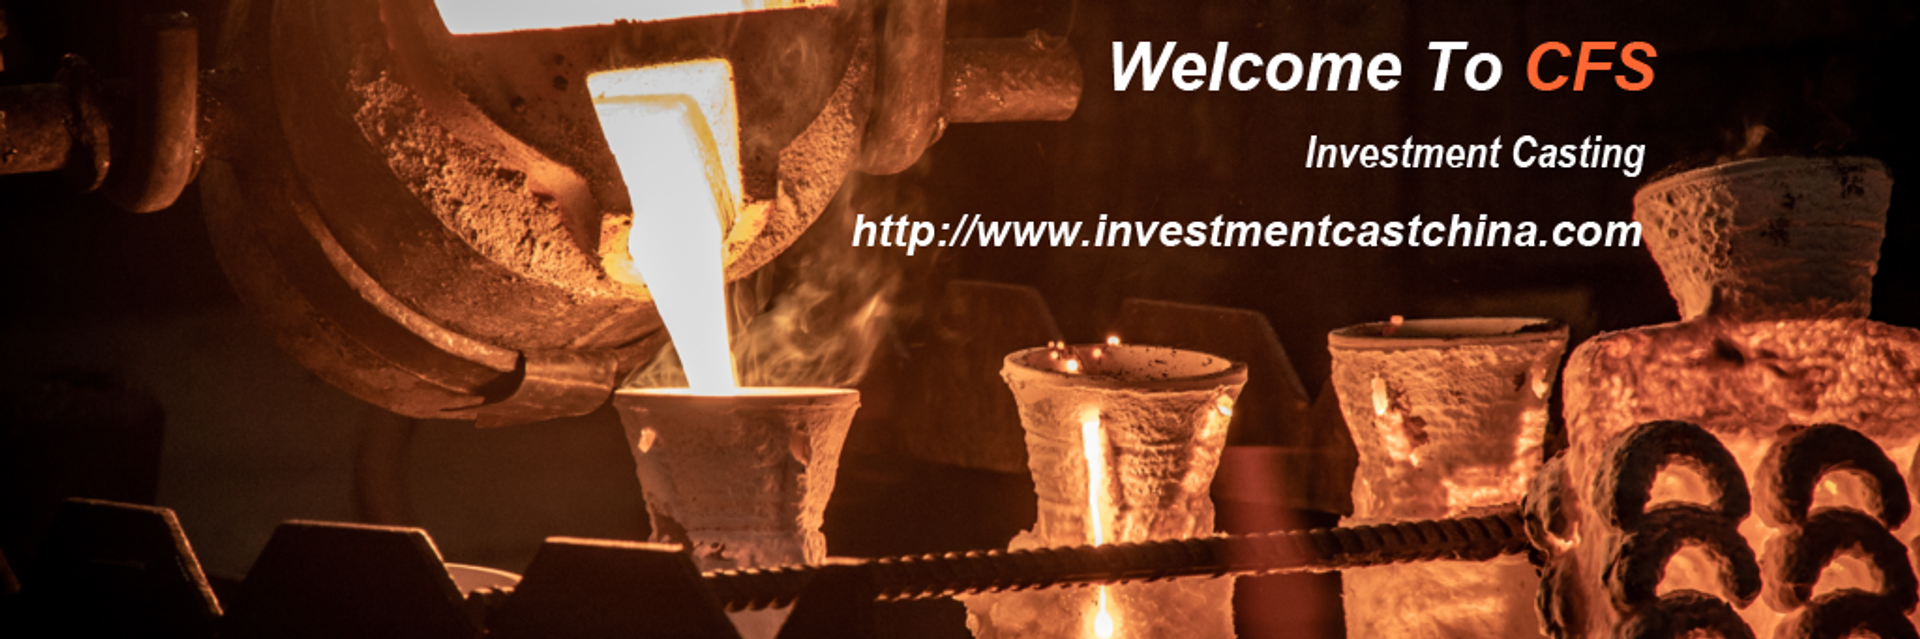 CFS Investment Casting